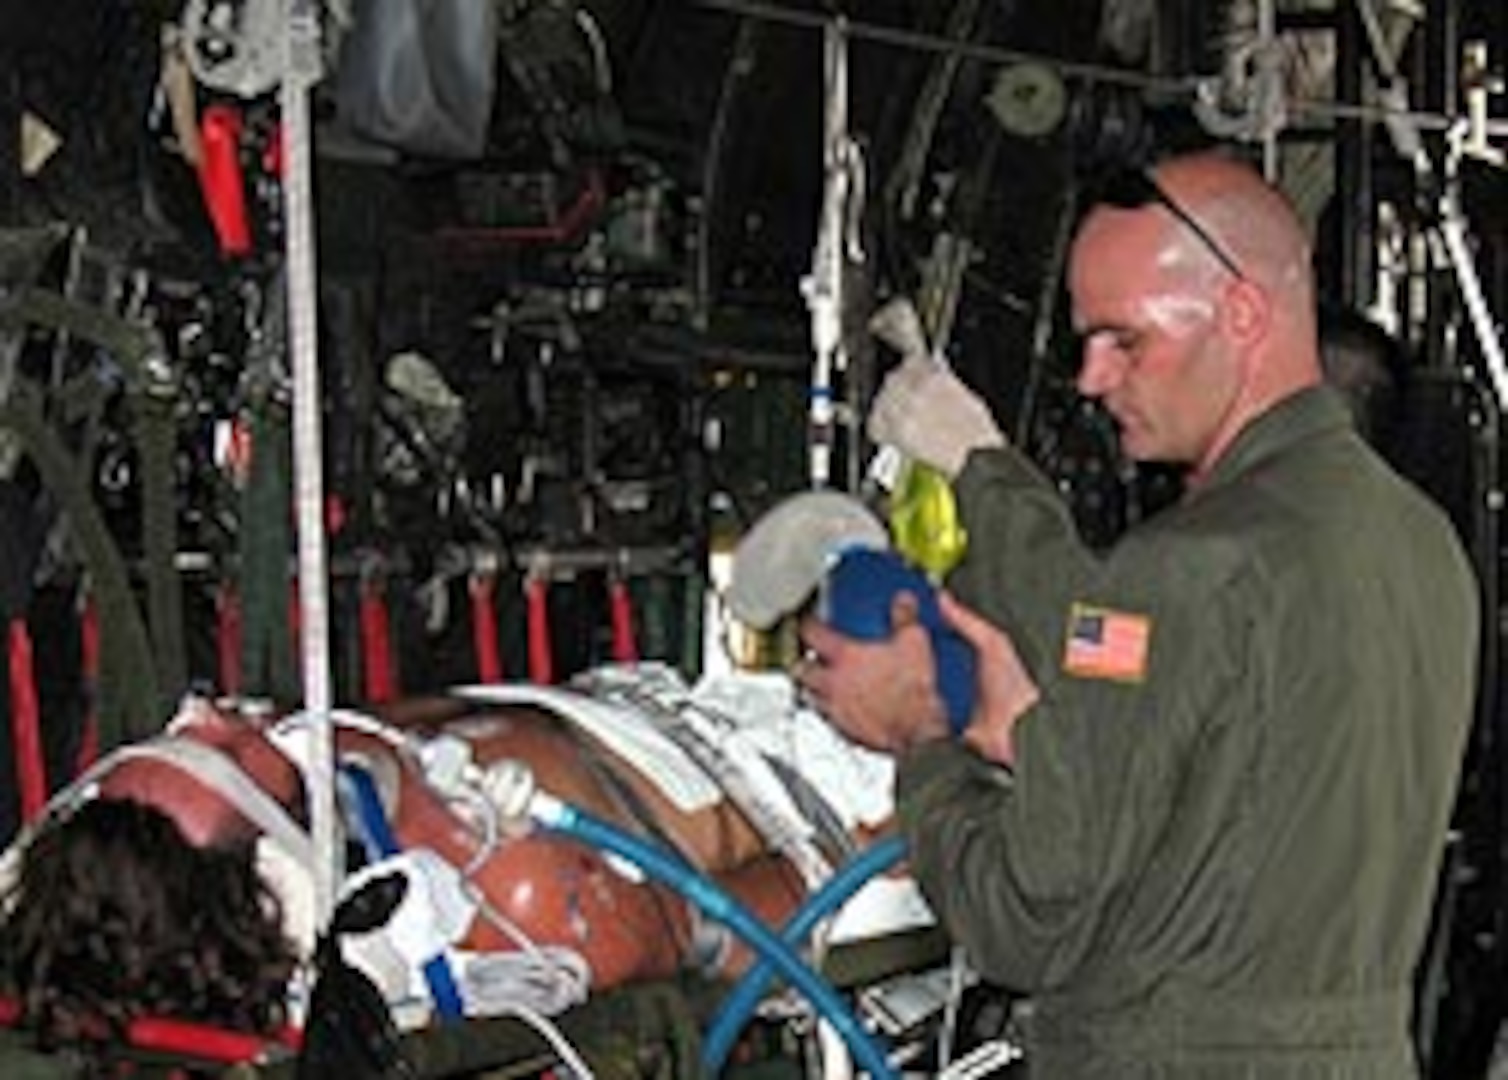 Master Sgt. Eric Degner provides manual air to the patient.